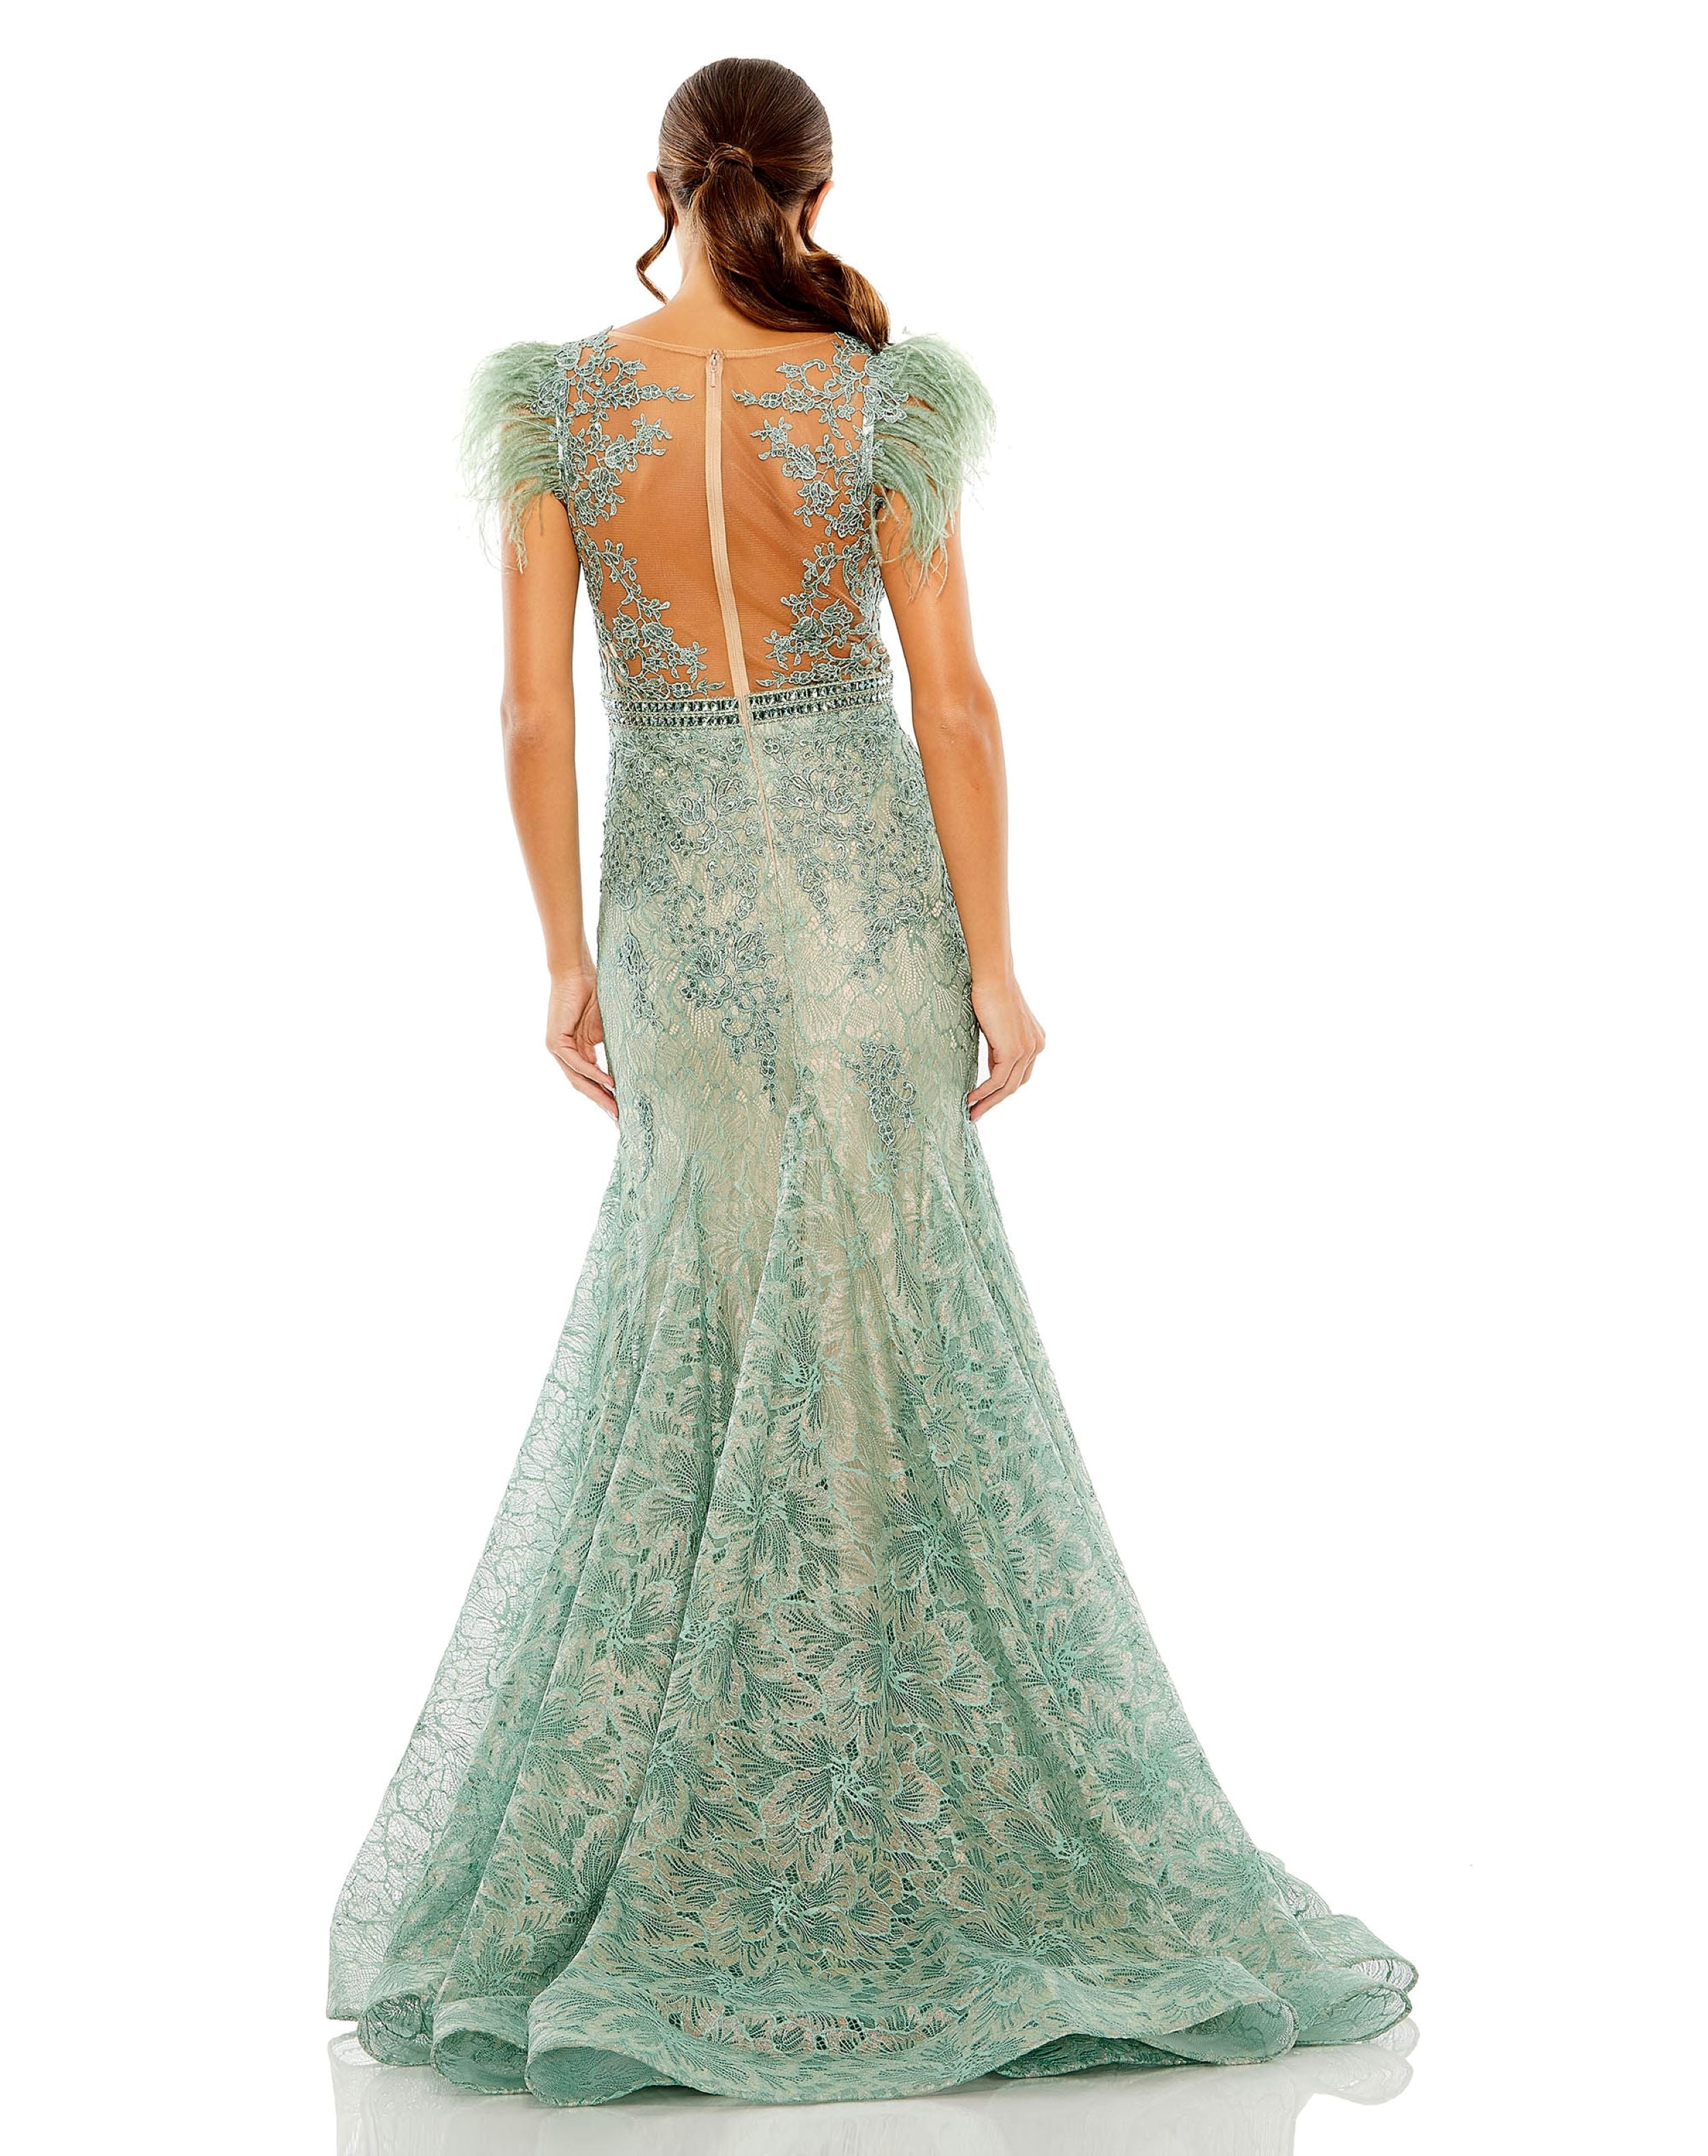 Embellished Feather Cap Sleeve Illusion Neck Trumpet Gown